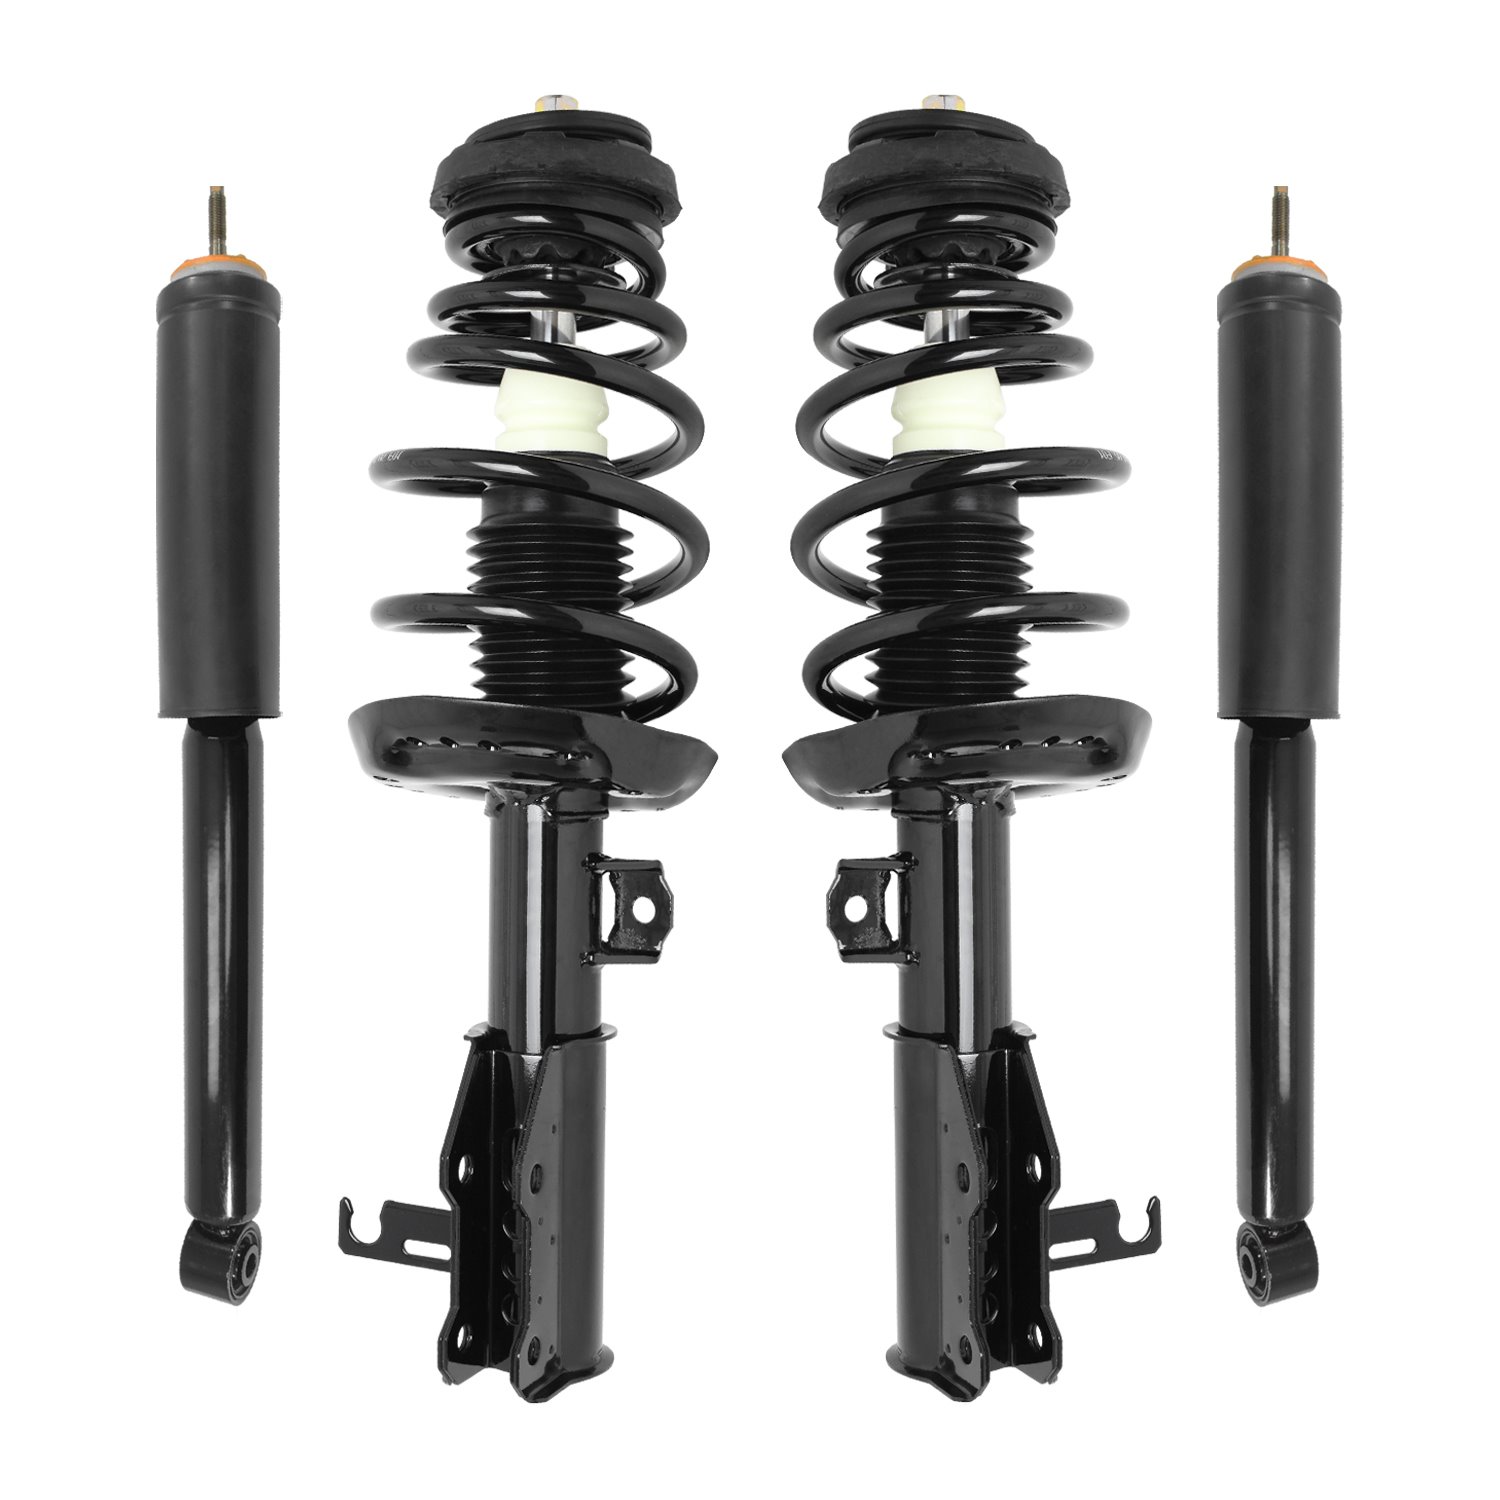 4-11035-251320-001 Suspension Strut & Coil Spring Assembly Fits Select GM